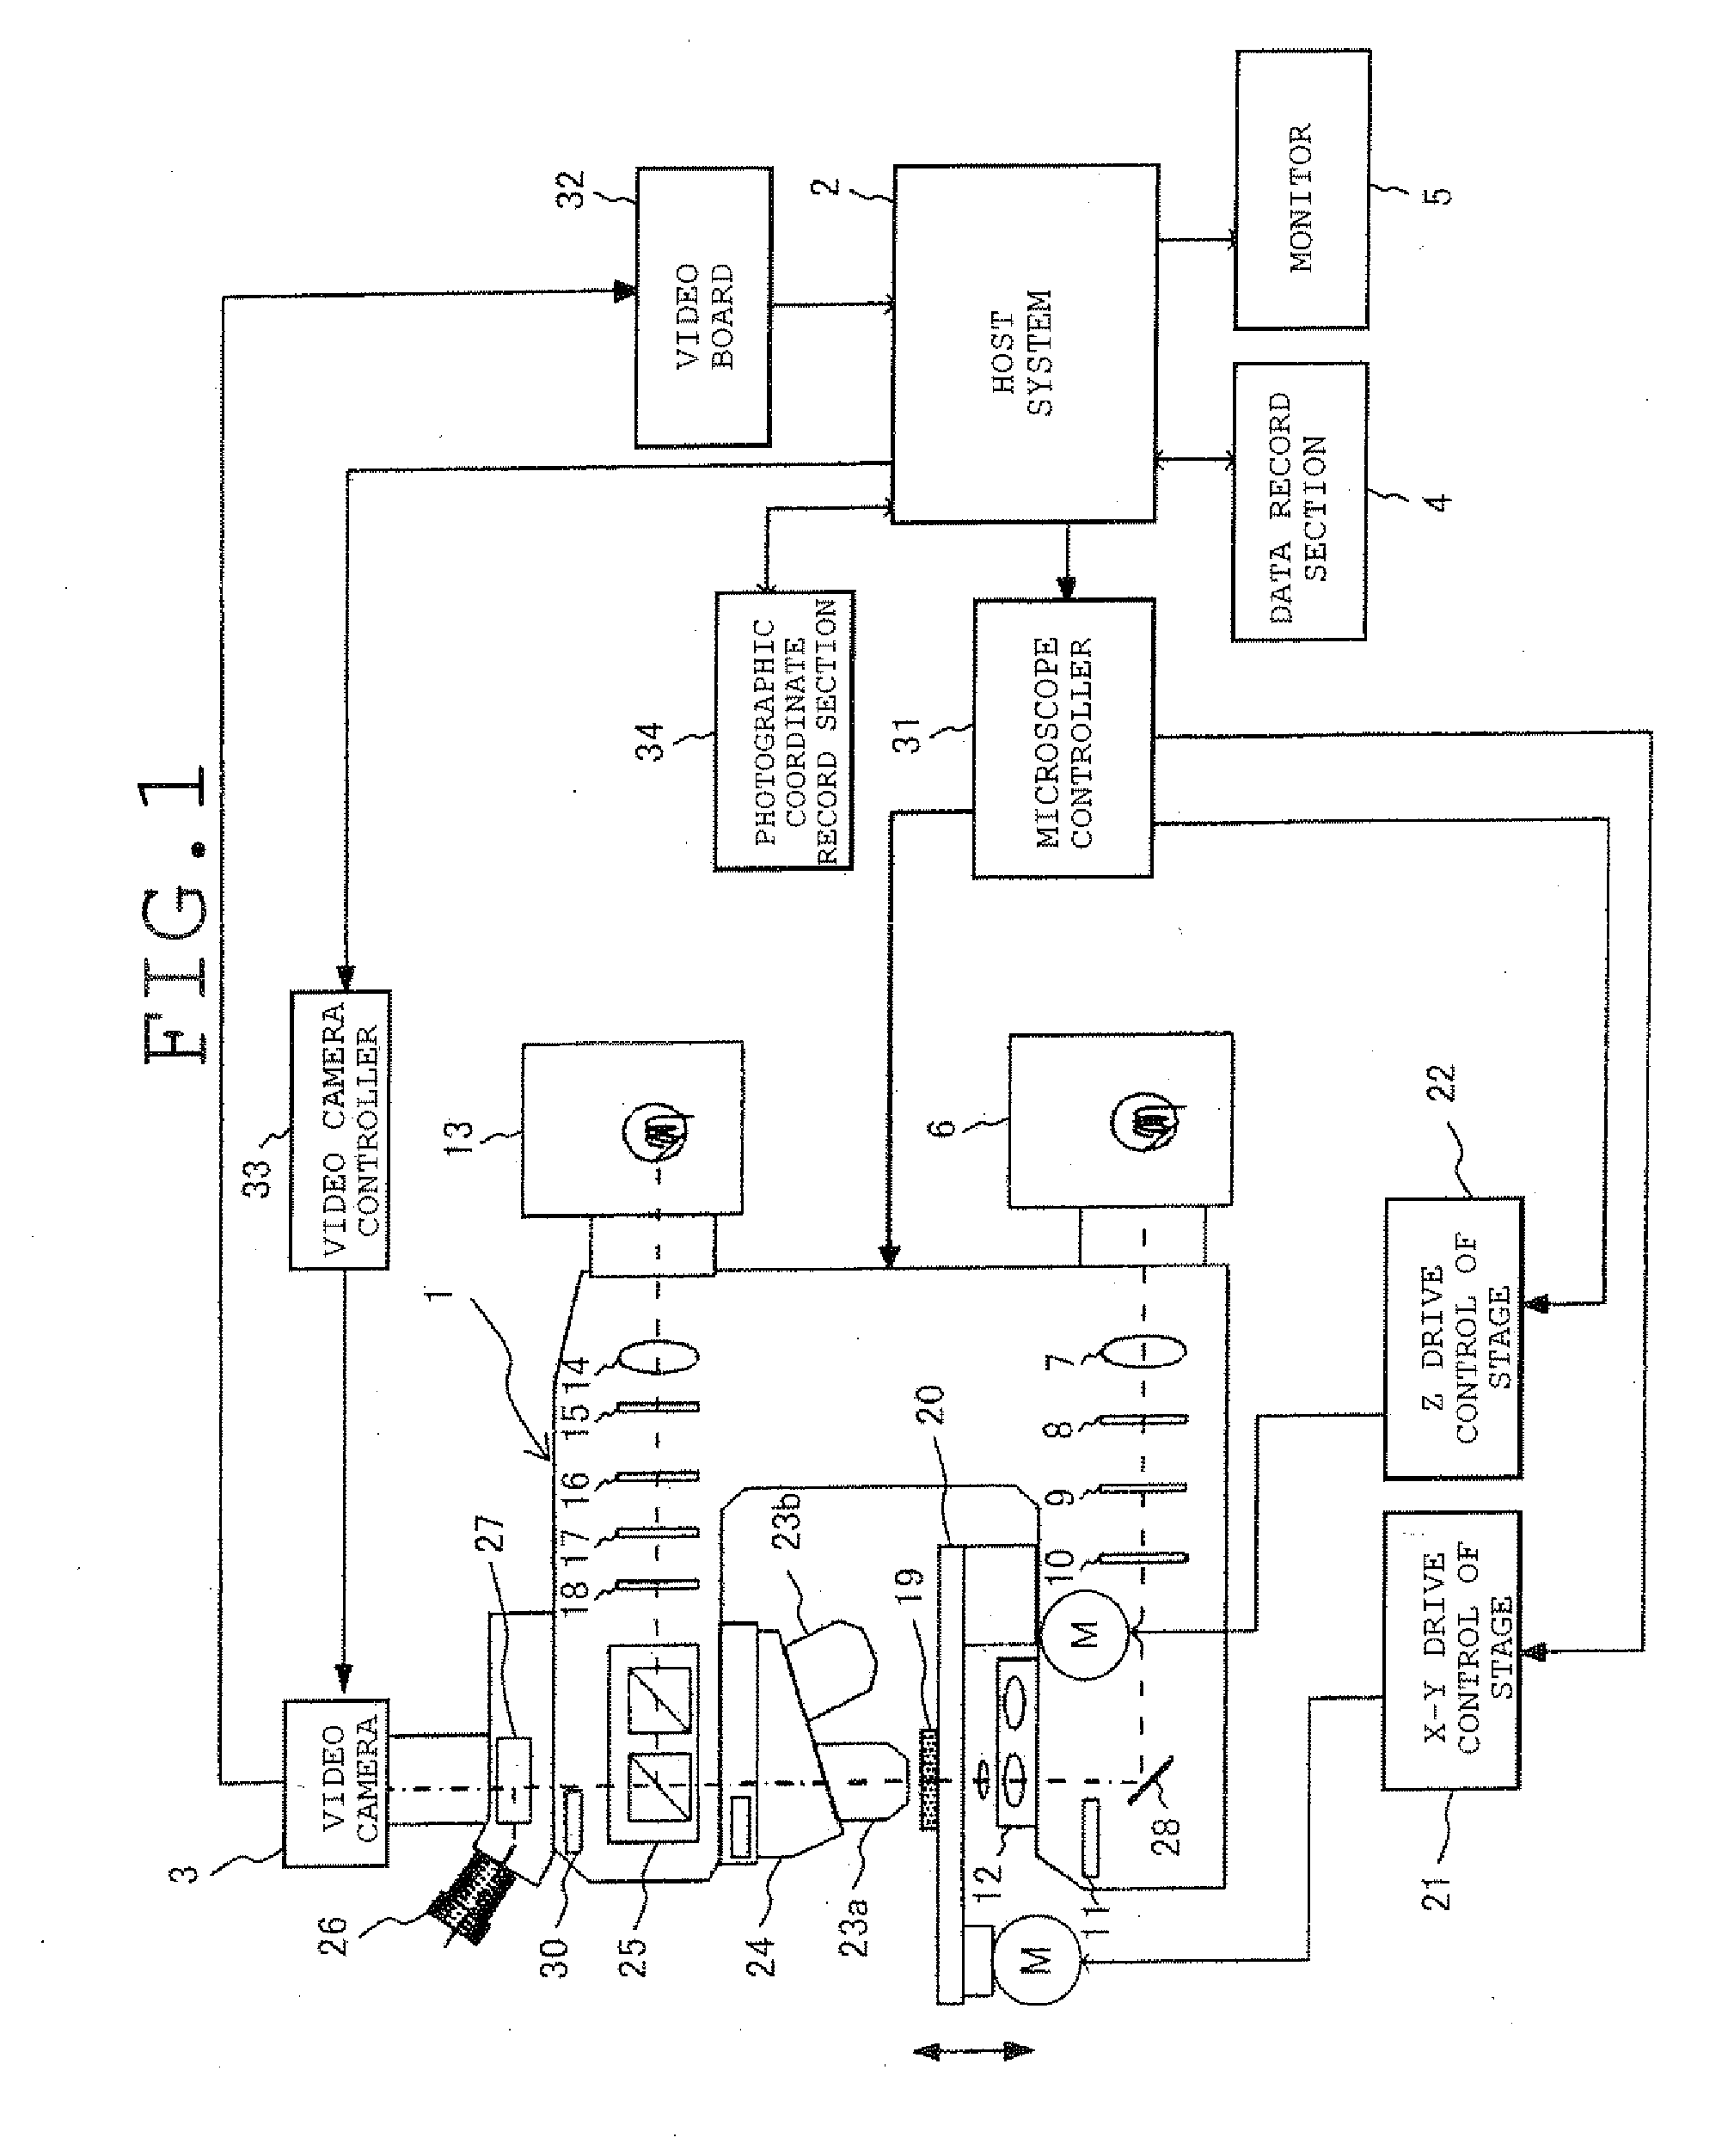 Microscope System, Image Generating Method, and Program for Practising the Same